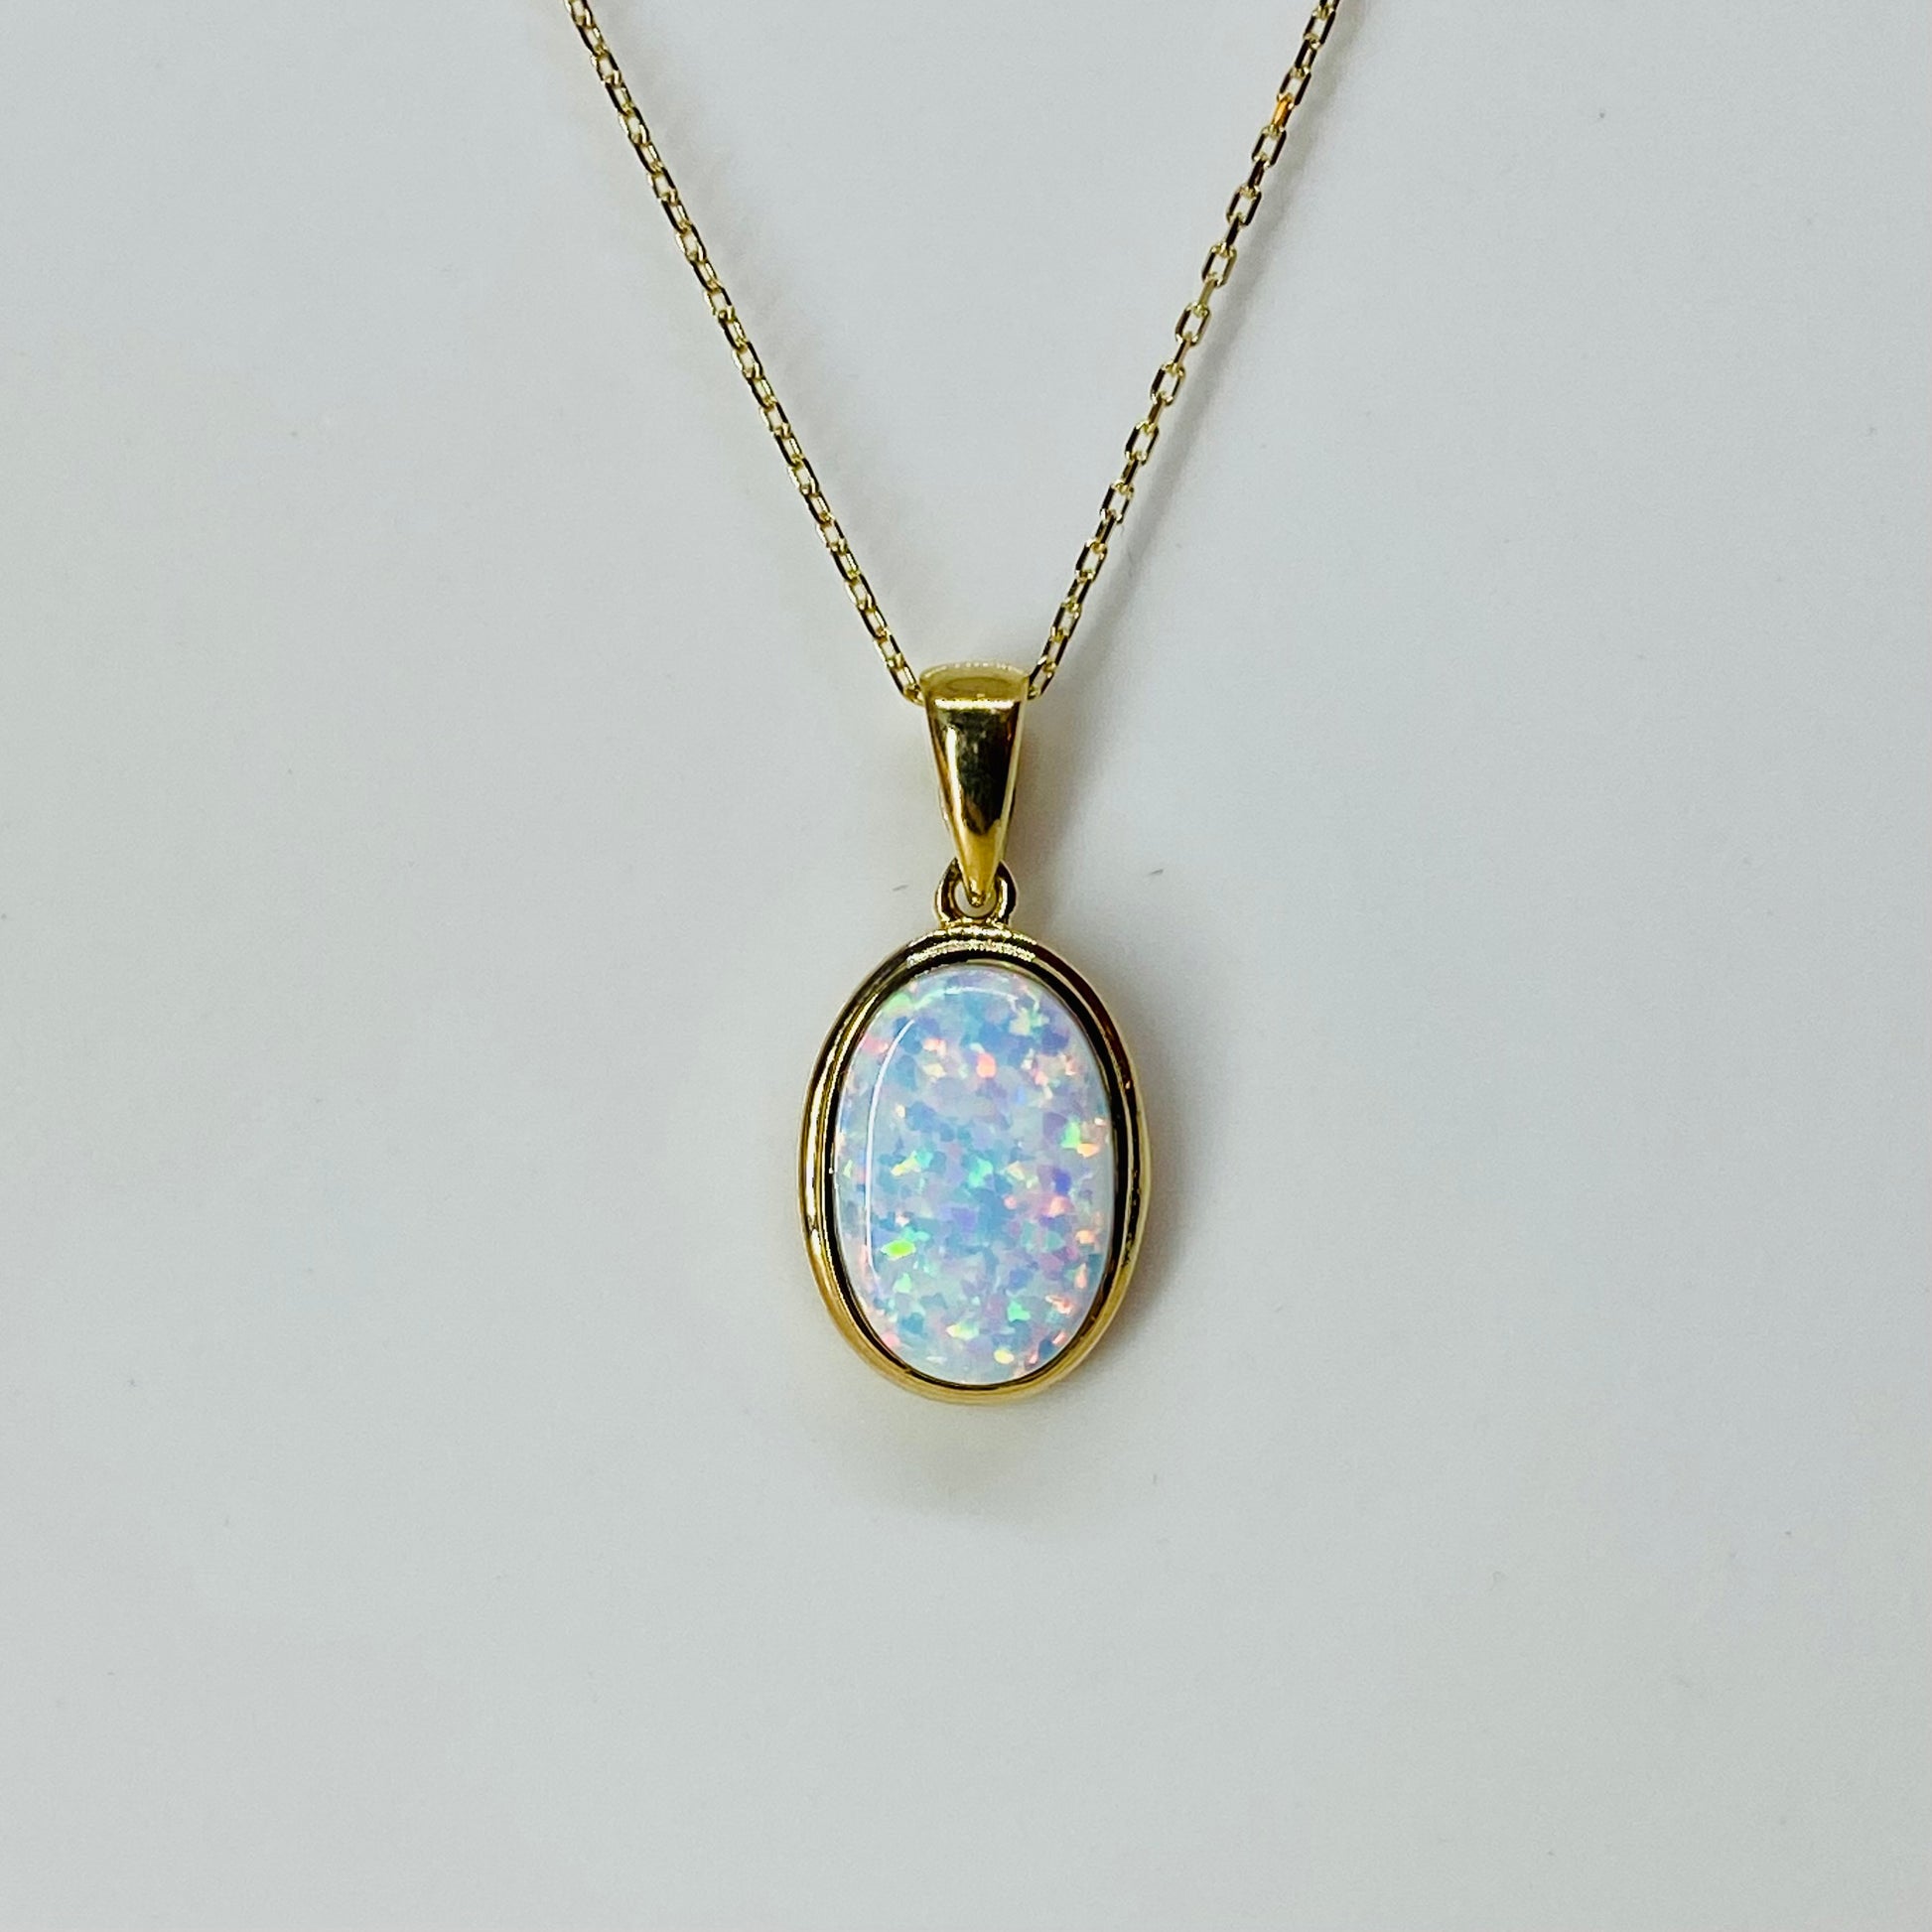 9ct Gold Oval Opalique Pendant Necklace - John Ross Jewellers